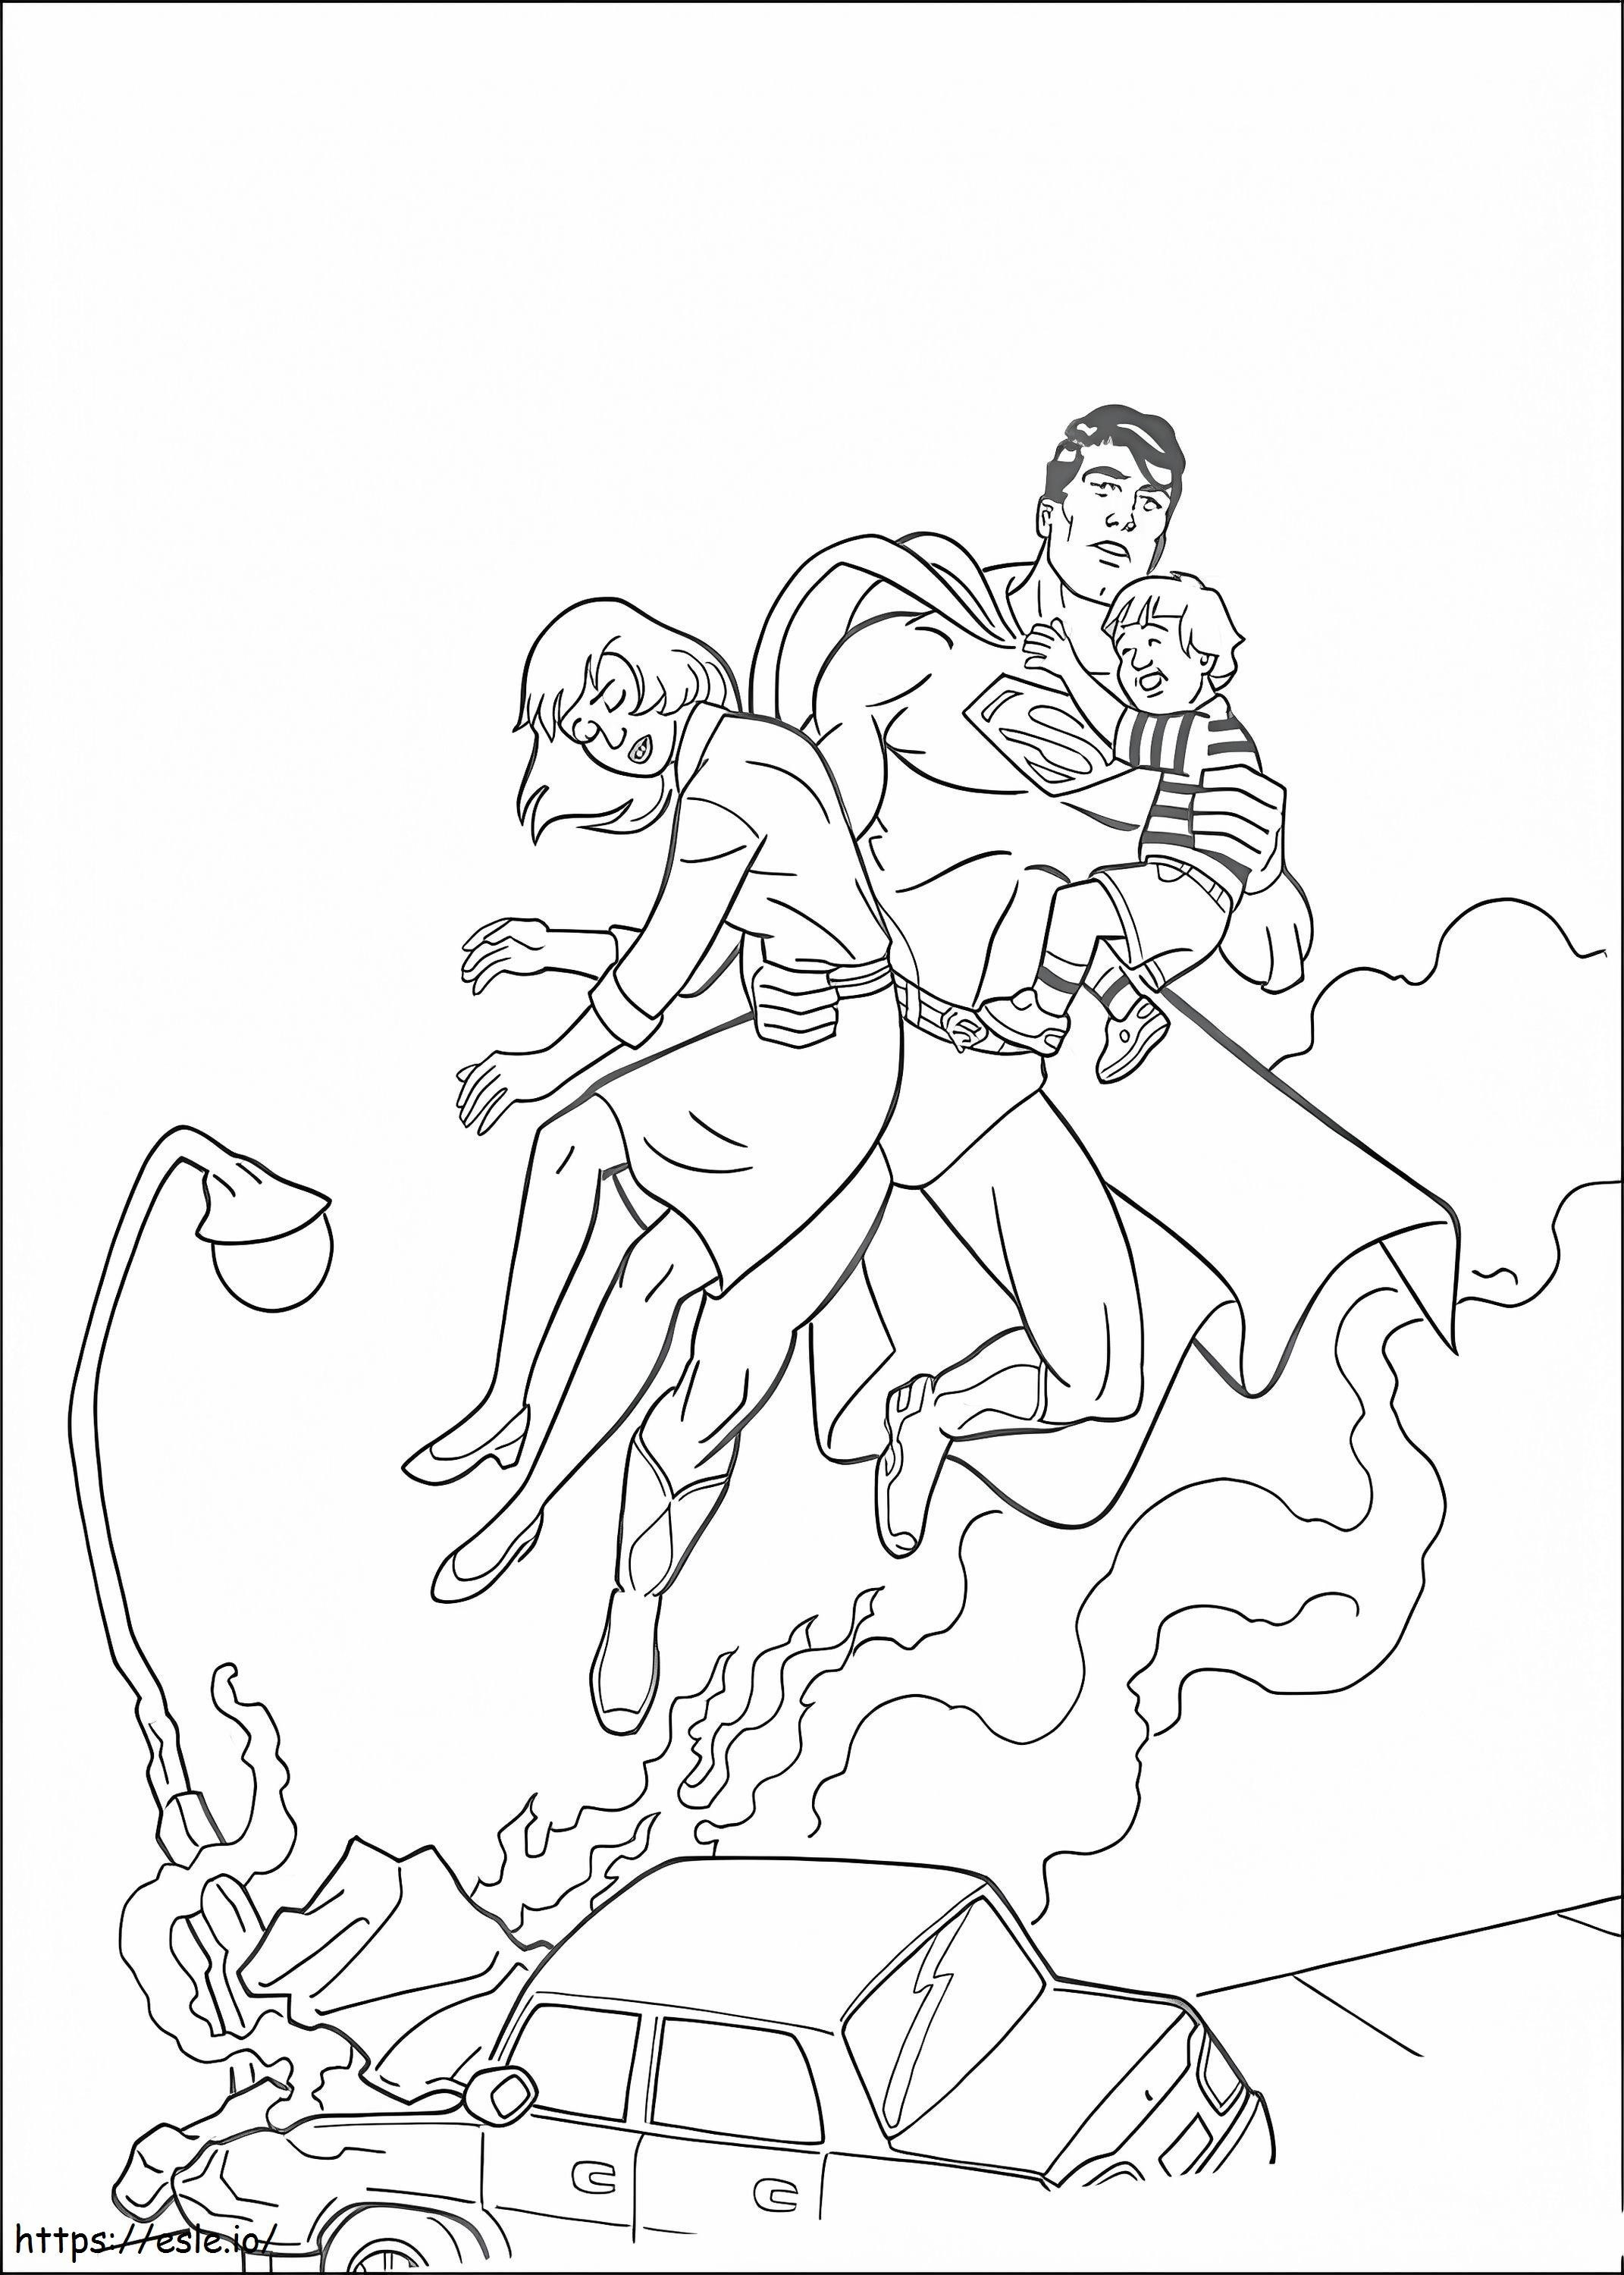 Superman Saves People coloring page